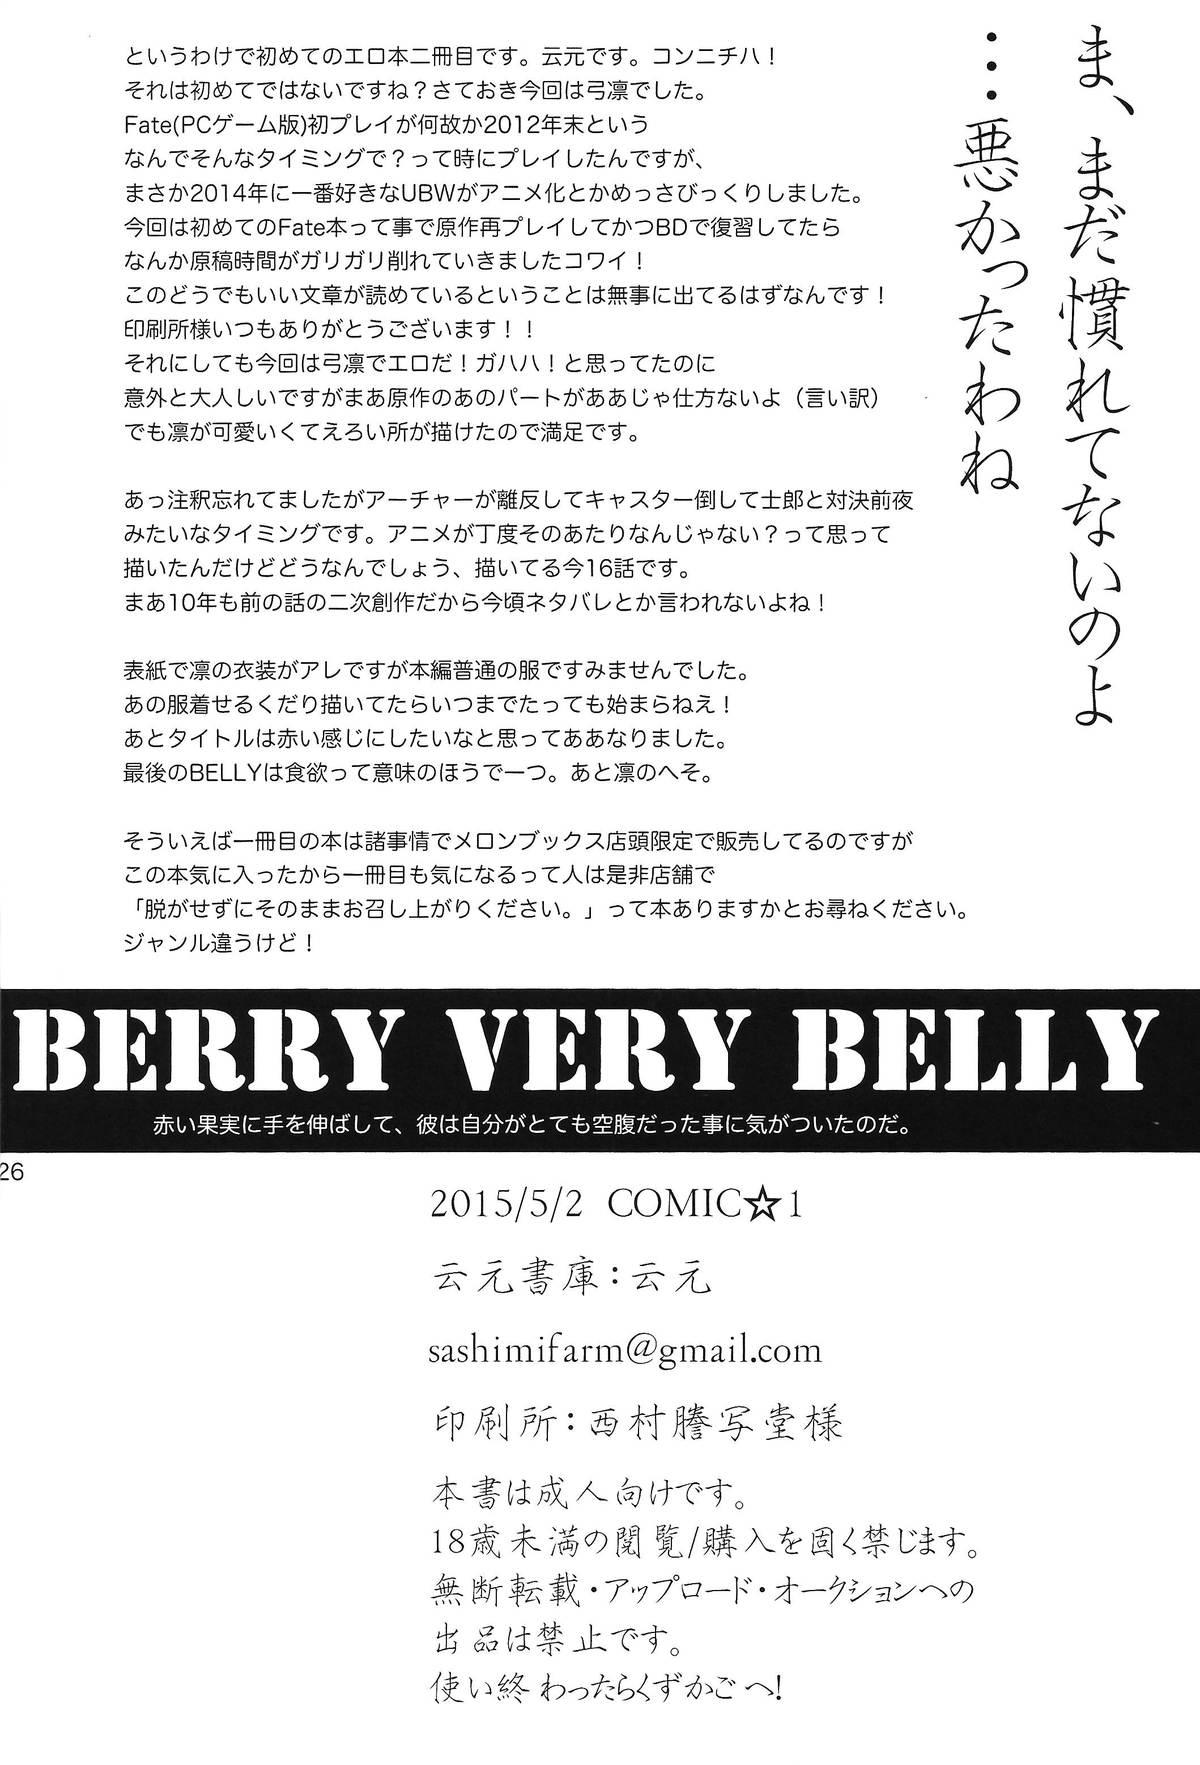 Hardcore BERRY VERY BELLY - Fate stay night Latin - Page 24